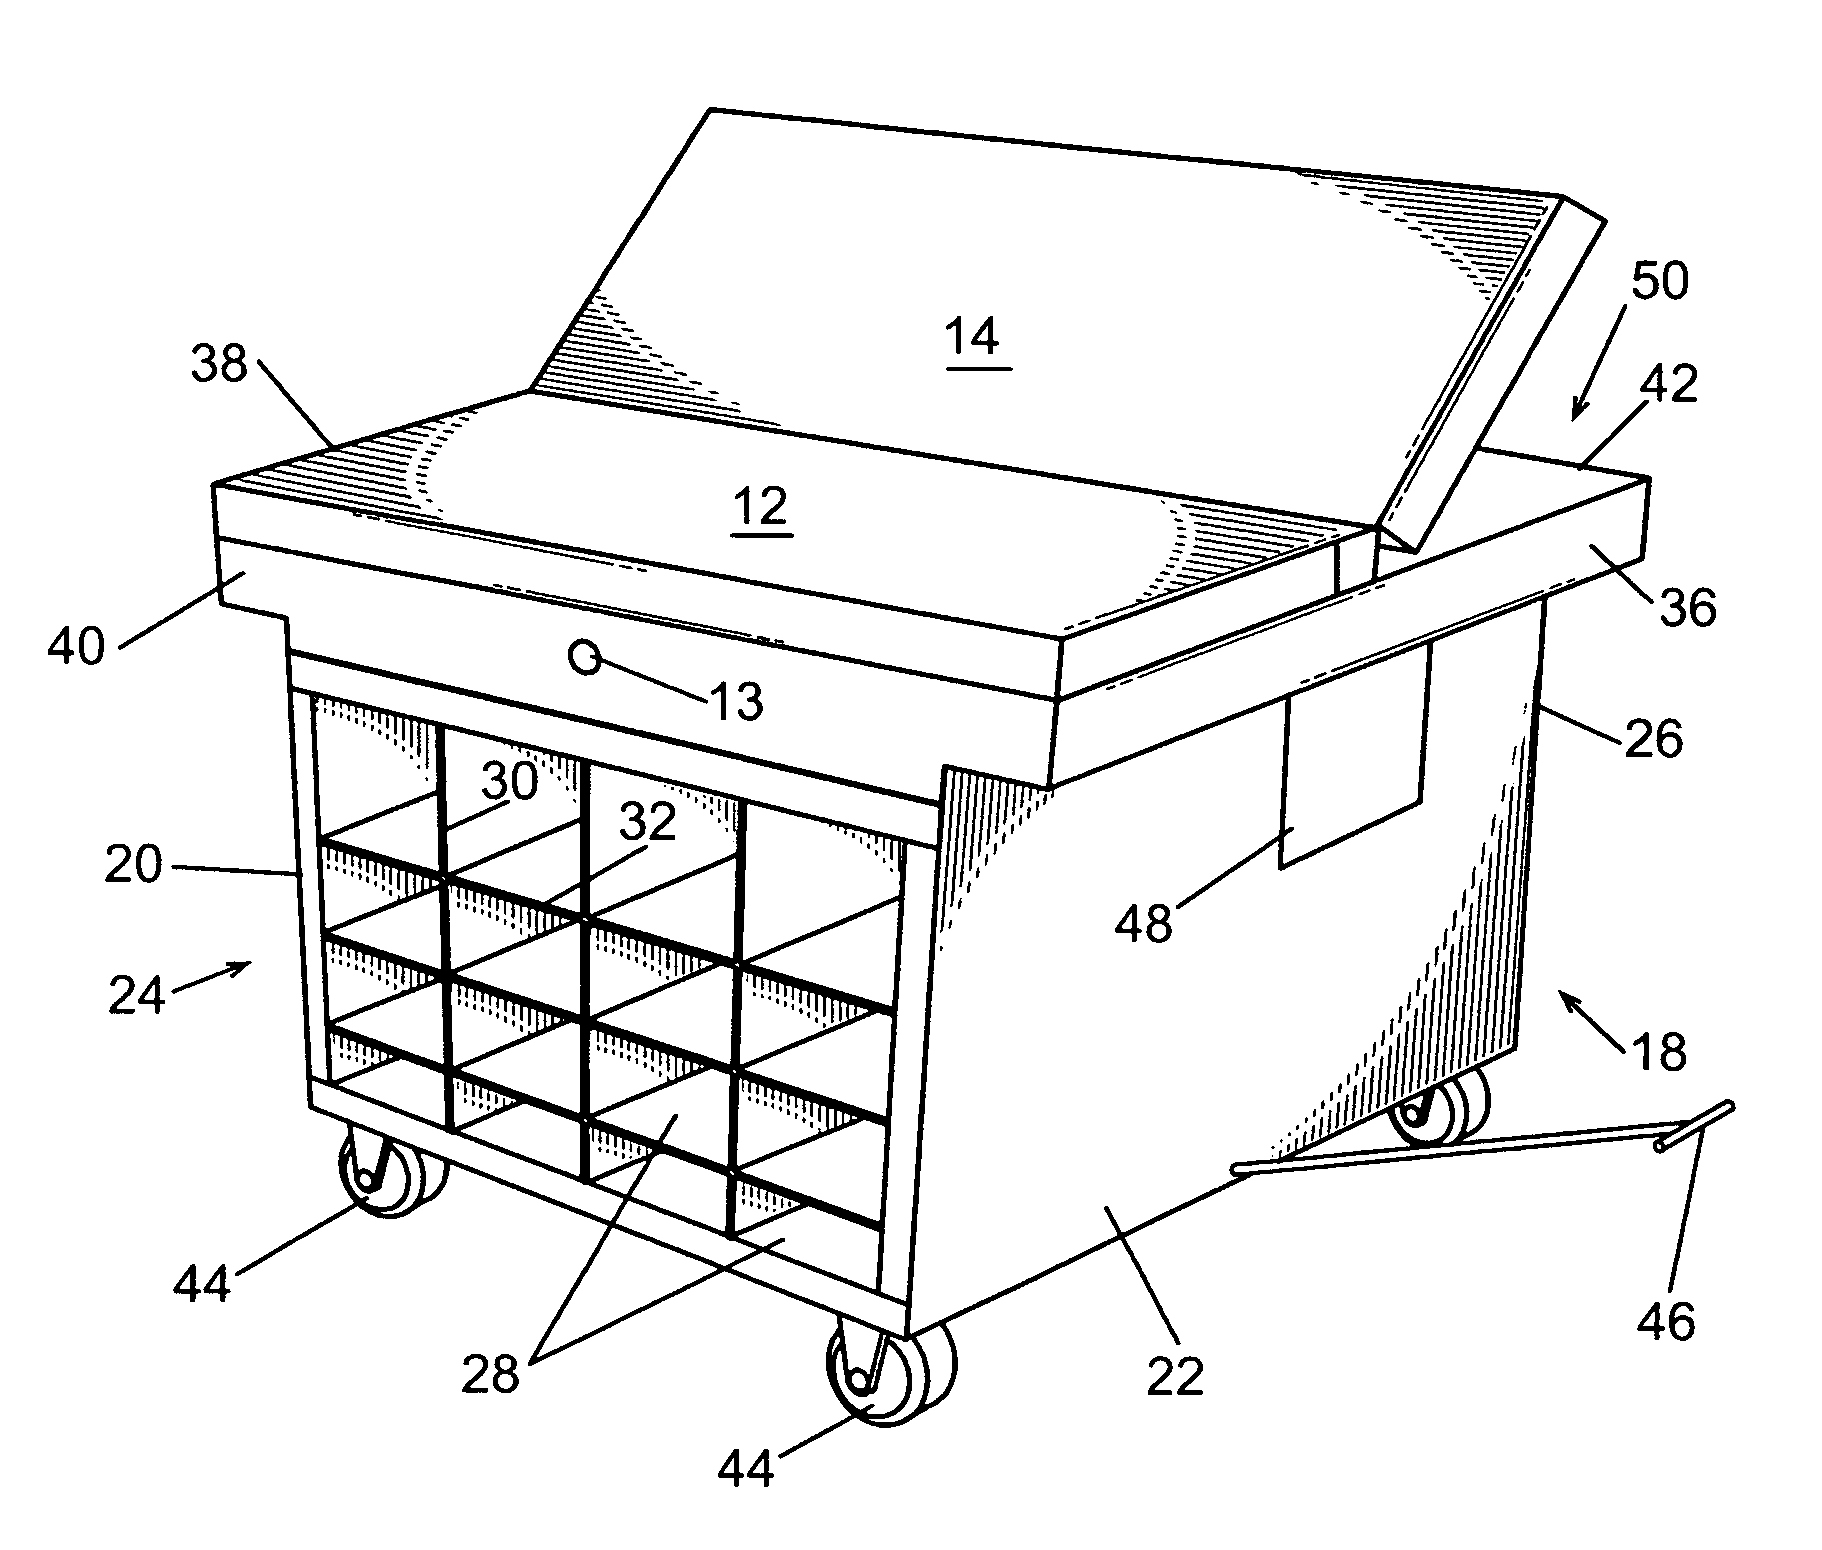 Audio/video programming and charging system and method